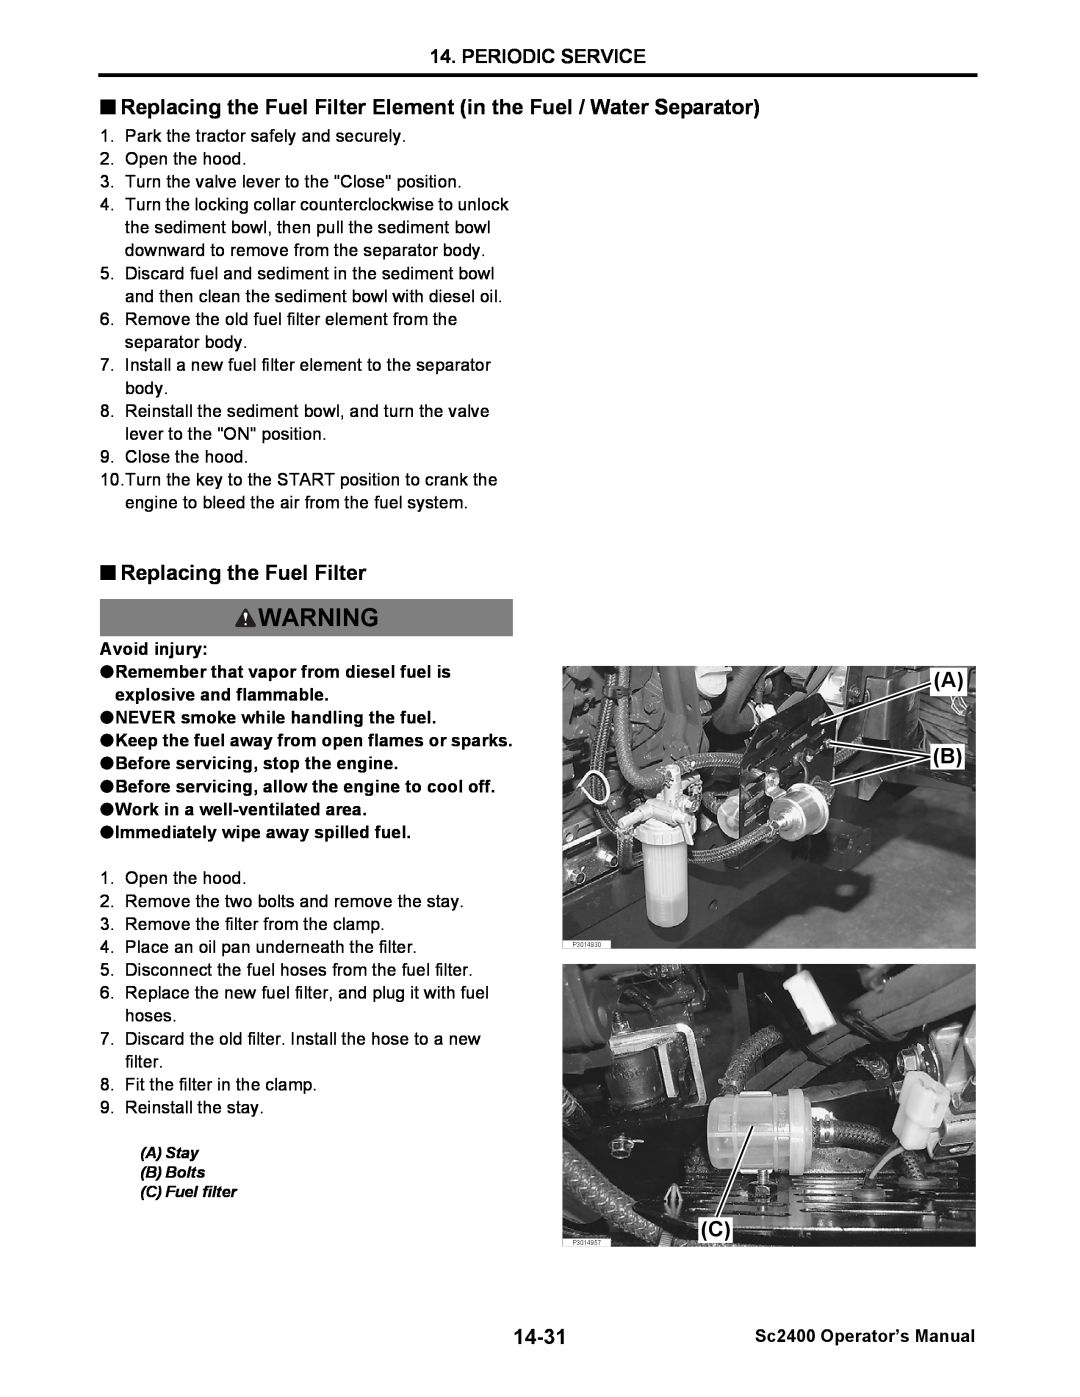 Cub Cadet SC2400 Periodic Service, 14-31, Avoid injury, NEVER smoke while handling the fuel, Sc2400 Operator’s Manual 